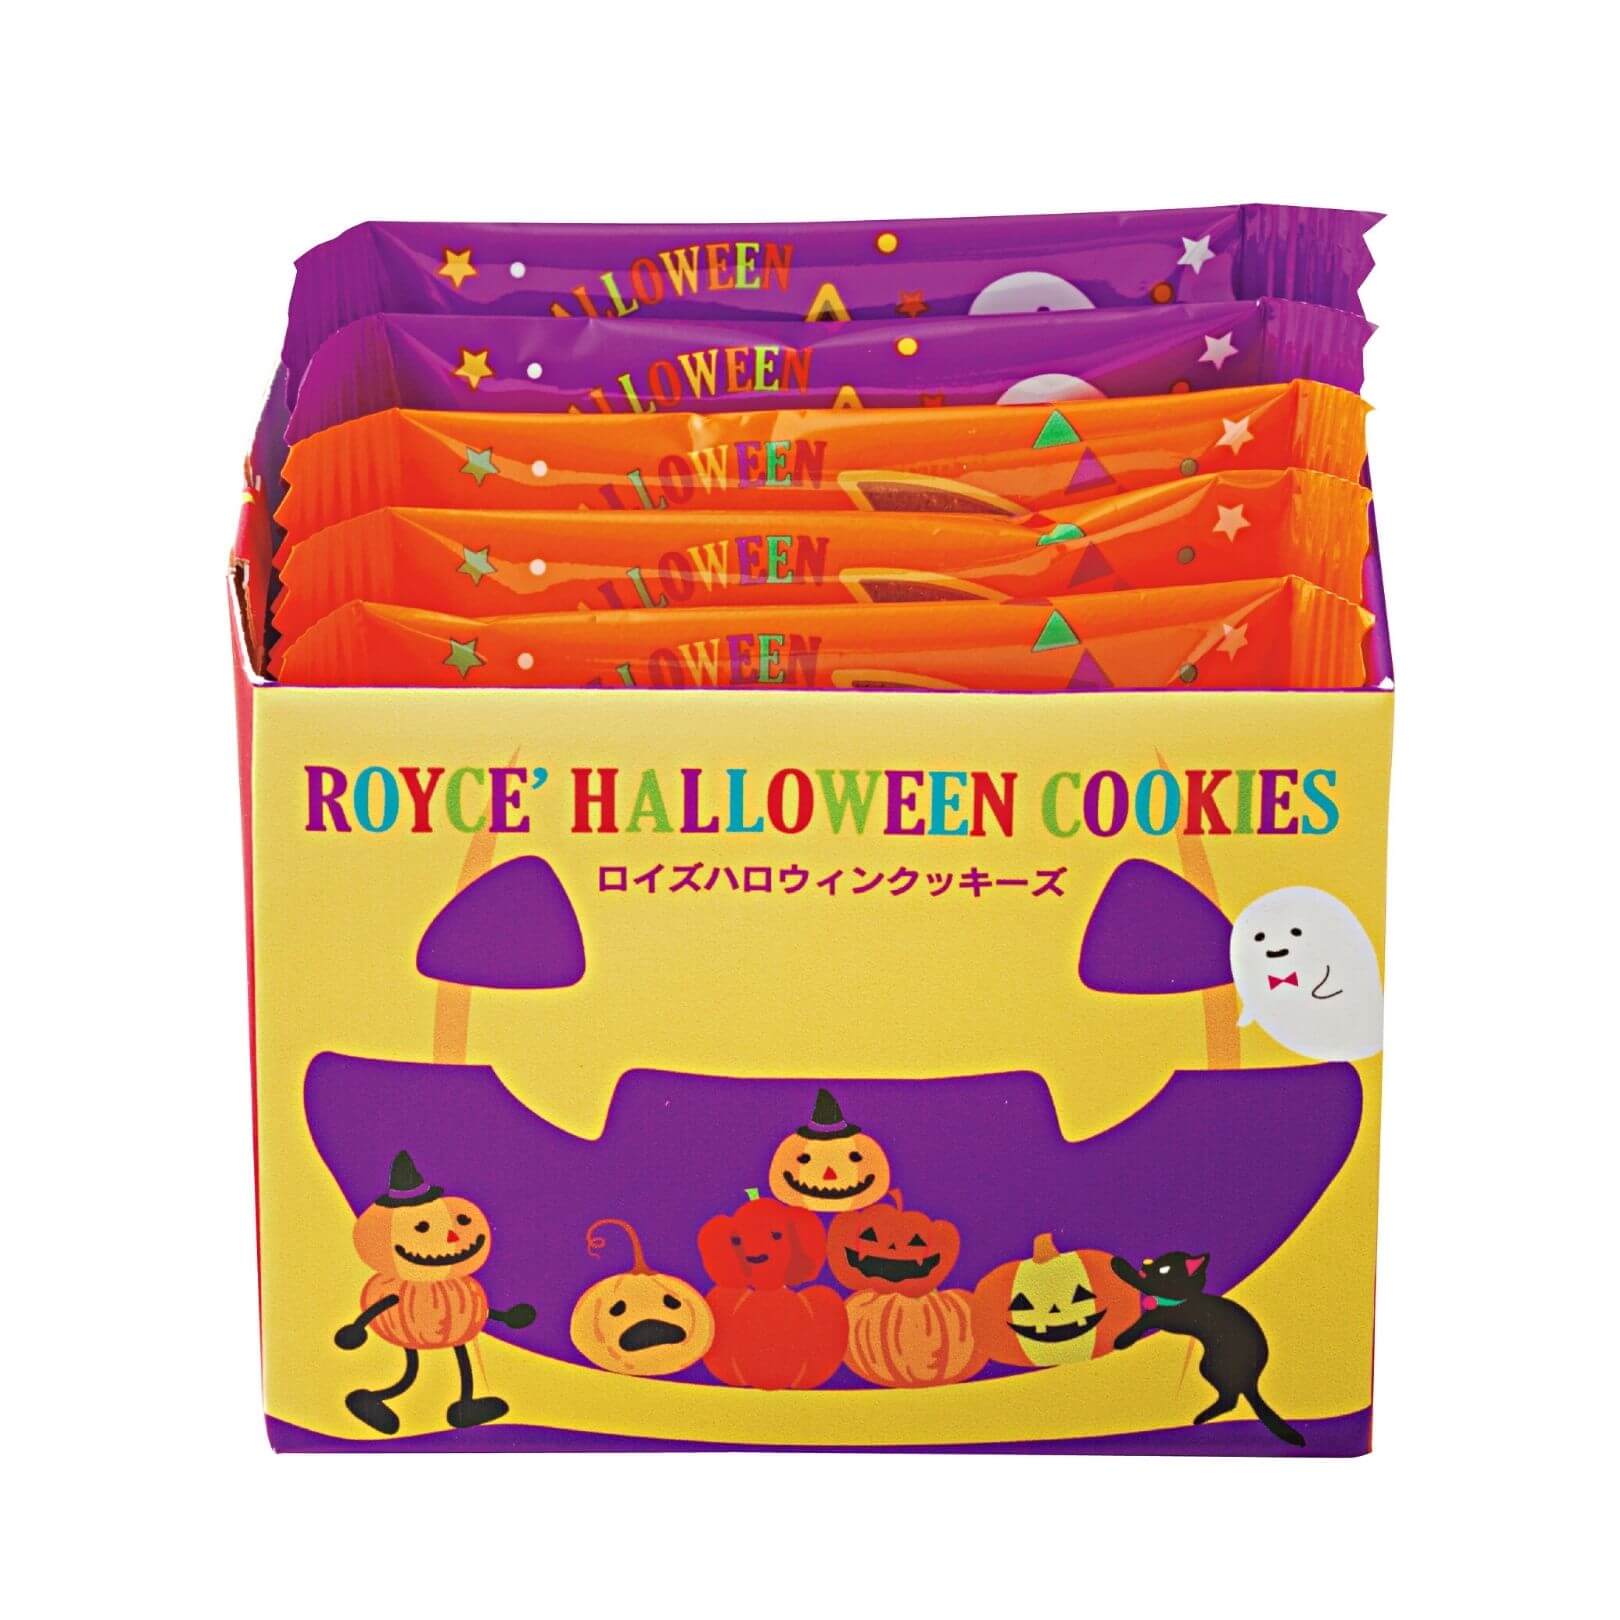 Image shows an open box with cookies inside with violet and orange wrappings. Text says Halloween. Front part shows a smiling pumpkin face in yellow and violet with illustrations of a ghost, a cat, and pumpkins. Text says ROYCE' Halloween Cookies.